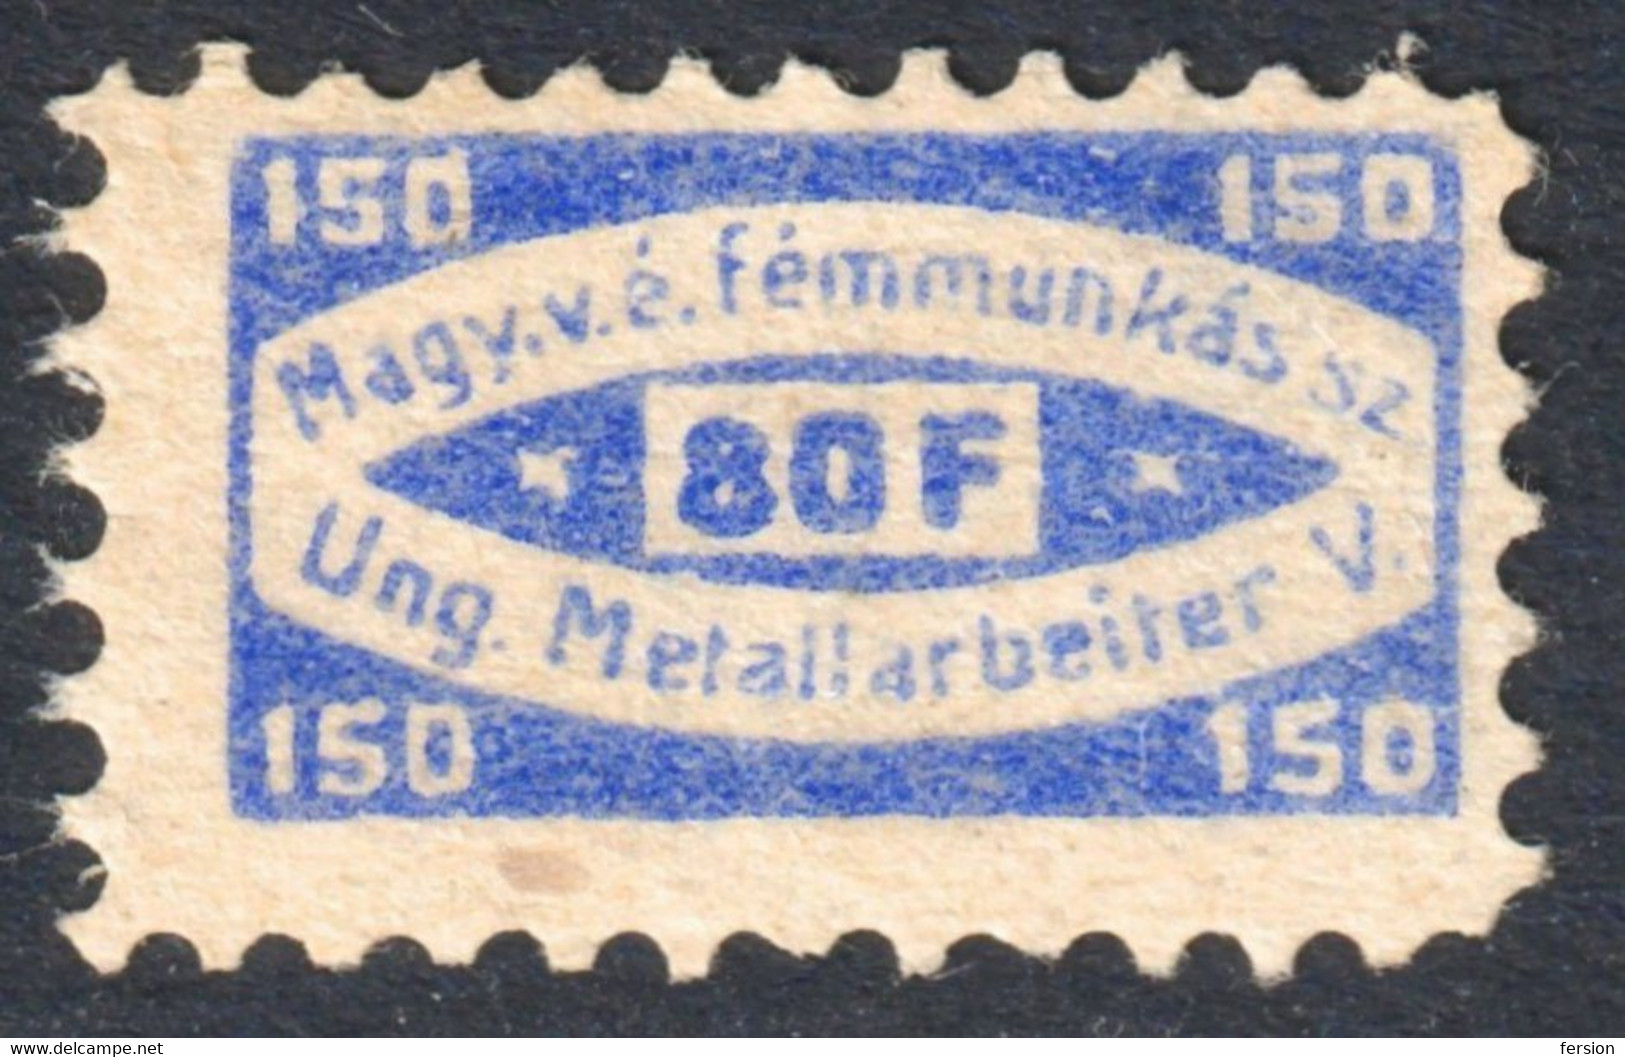 METAL INDUSTRY Factory Worker Trade Labour Union Hungary 1910's Charity Tax LABEL VIGNETTE CINDERELLA Germany - Servizio